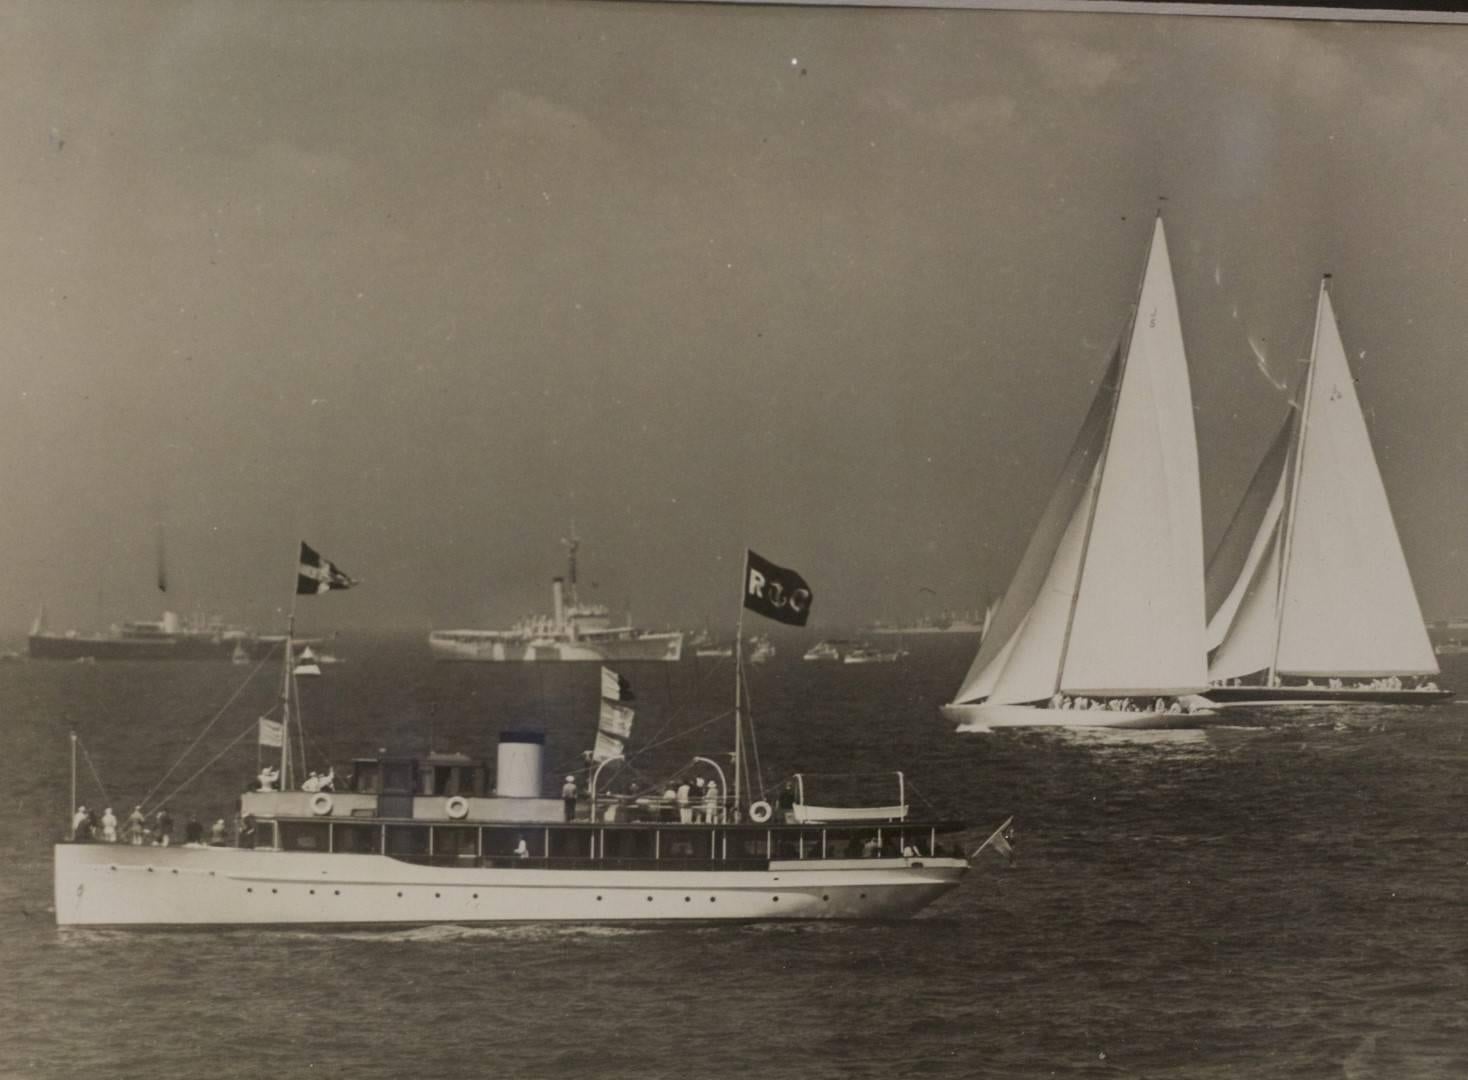 Original press photo showing the America's Cup yachts Ranger and Endeavour II, from 1937. Photo is from article, highlighting 3rd race of Newport of America's Cup series. Also shows spectator fleet. Matted and framed. Dimensions: 12